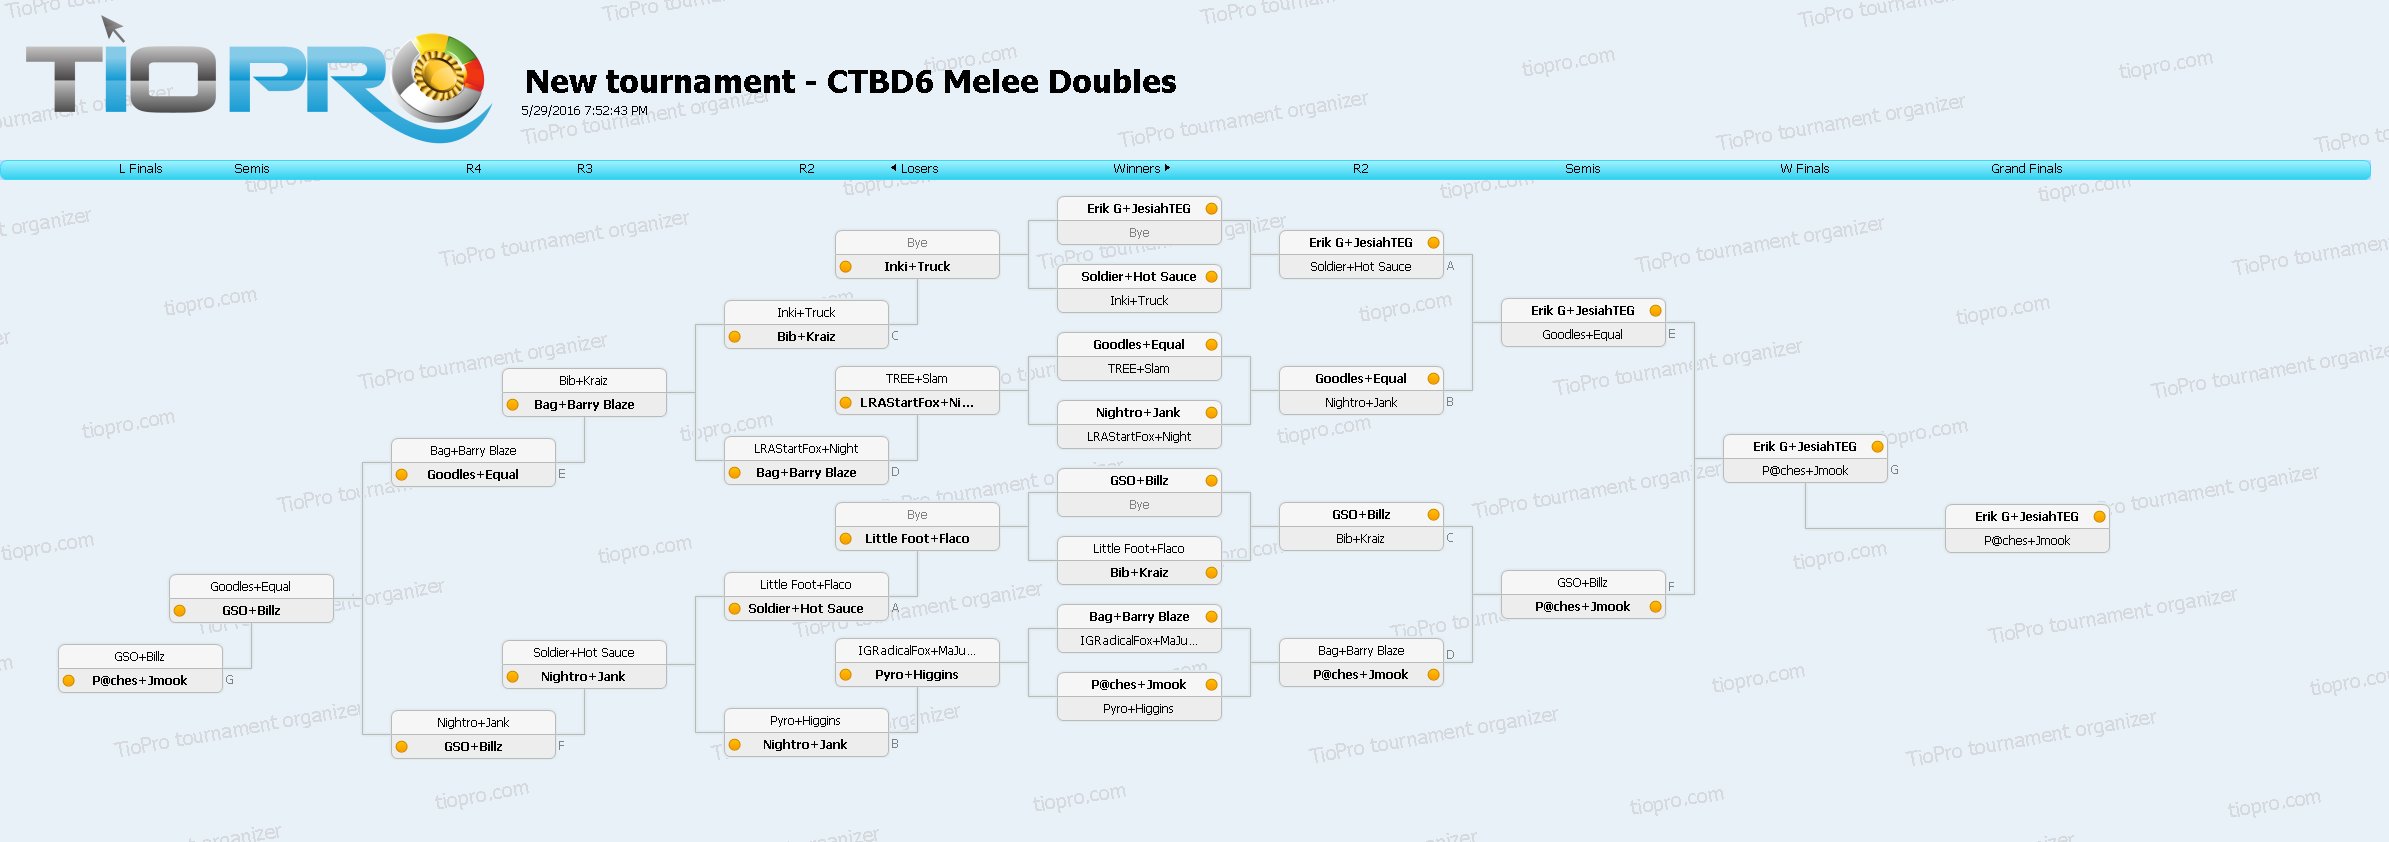 CTBD6 Melee Doubles